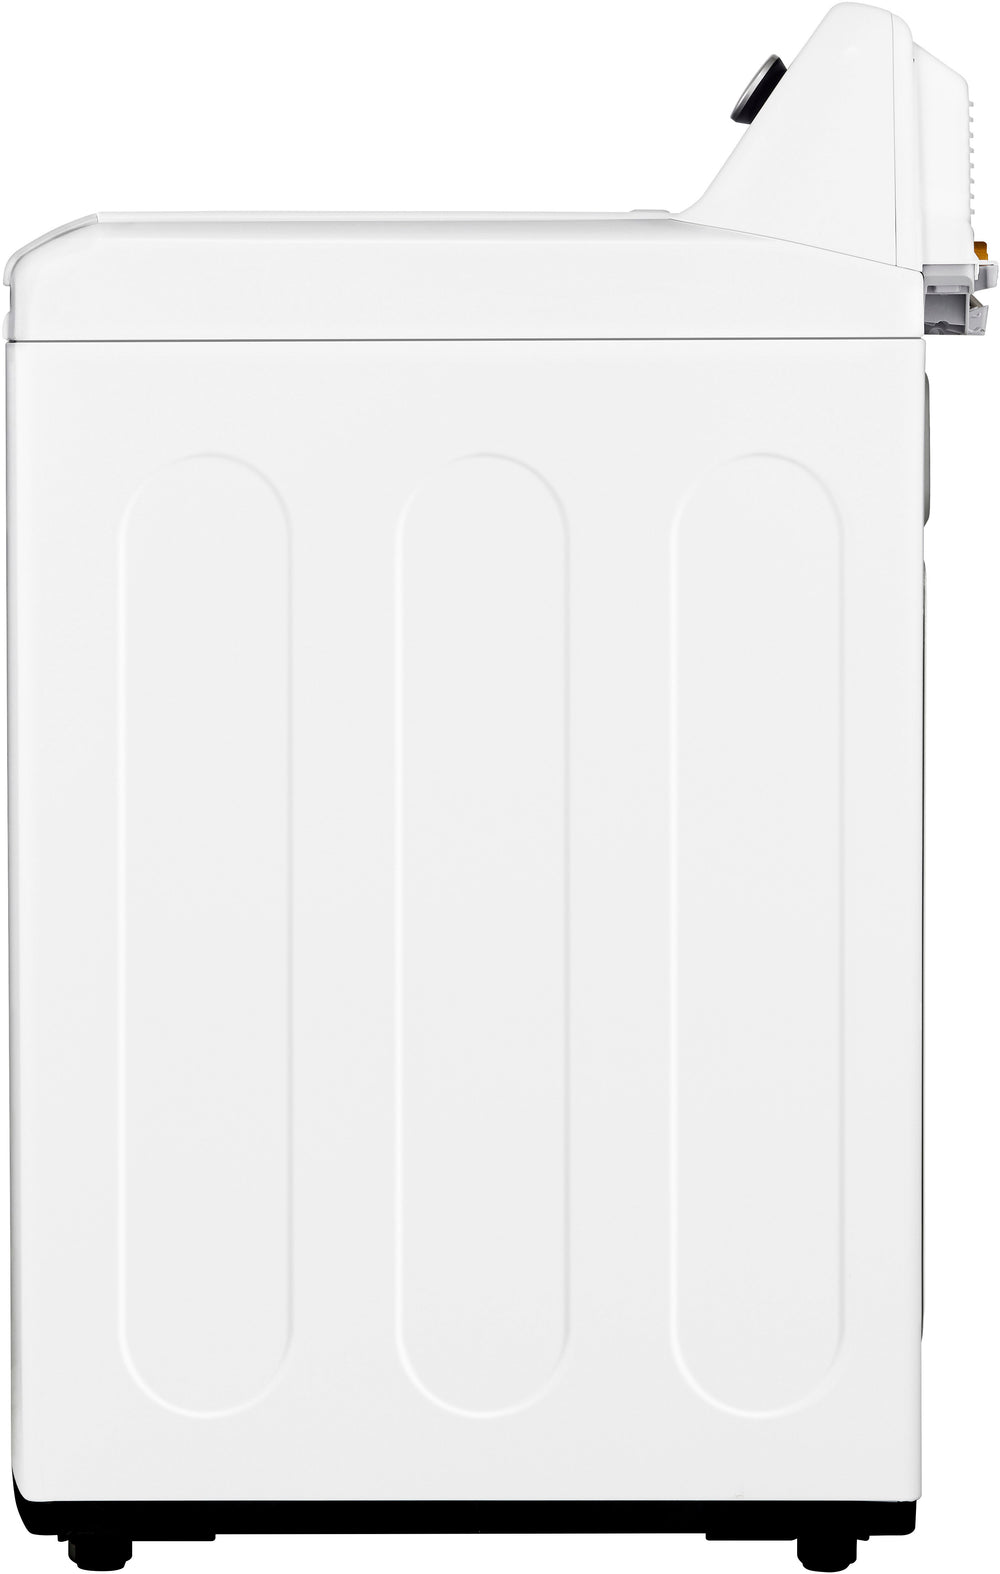 LG - 4.8 Cu. Ft. High-Efficiency Smart Top Load Washer with 4 Way Agitator and TurboDrum - White_1